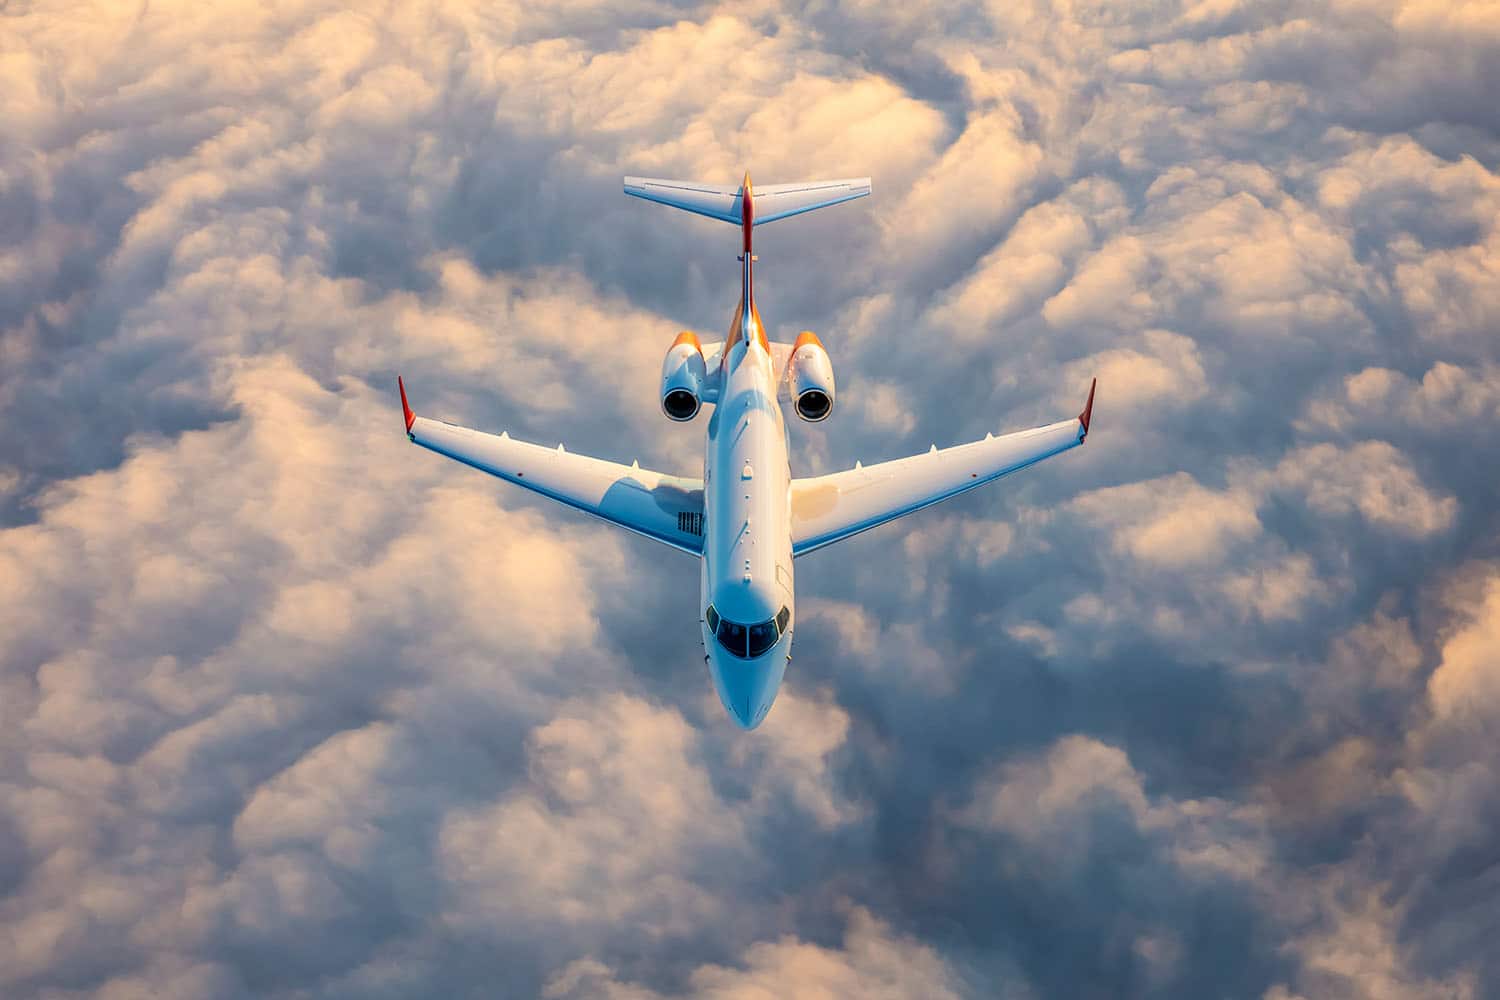 Challenger 300 Aerial over Clouds